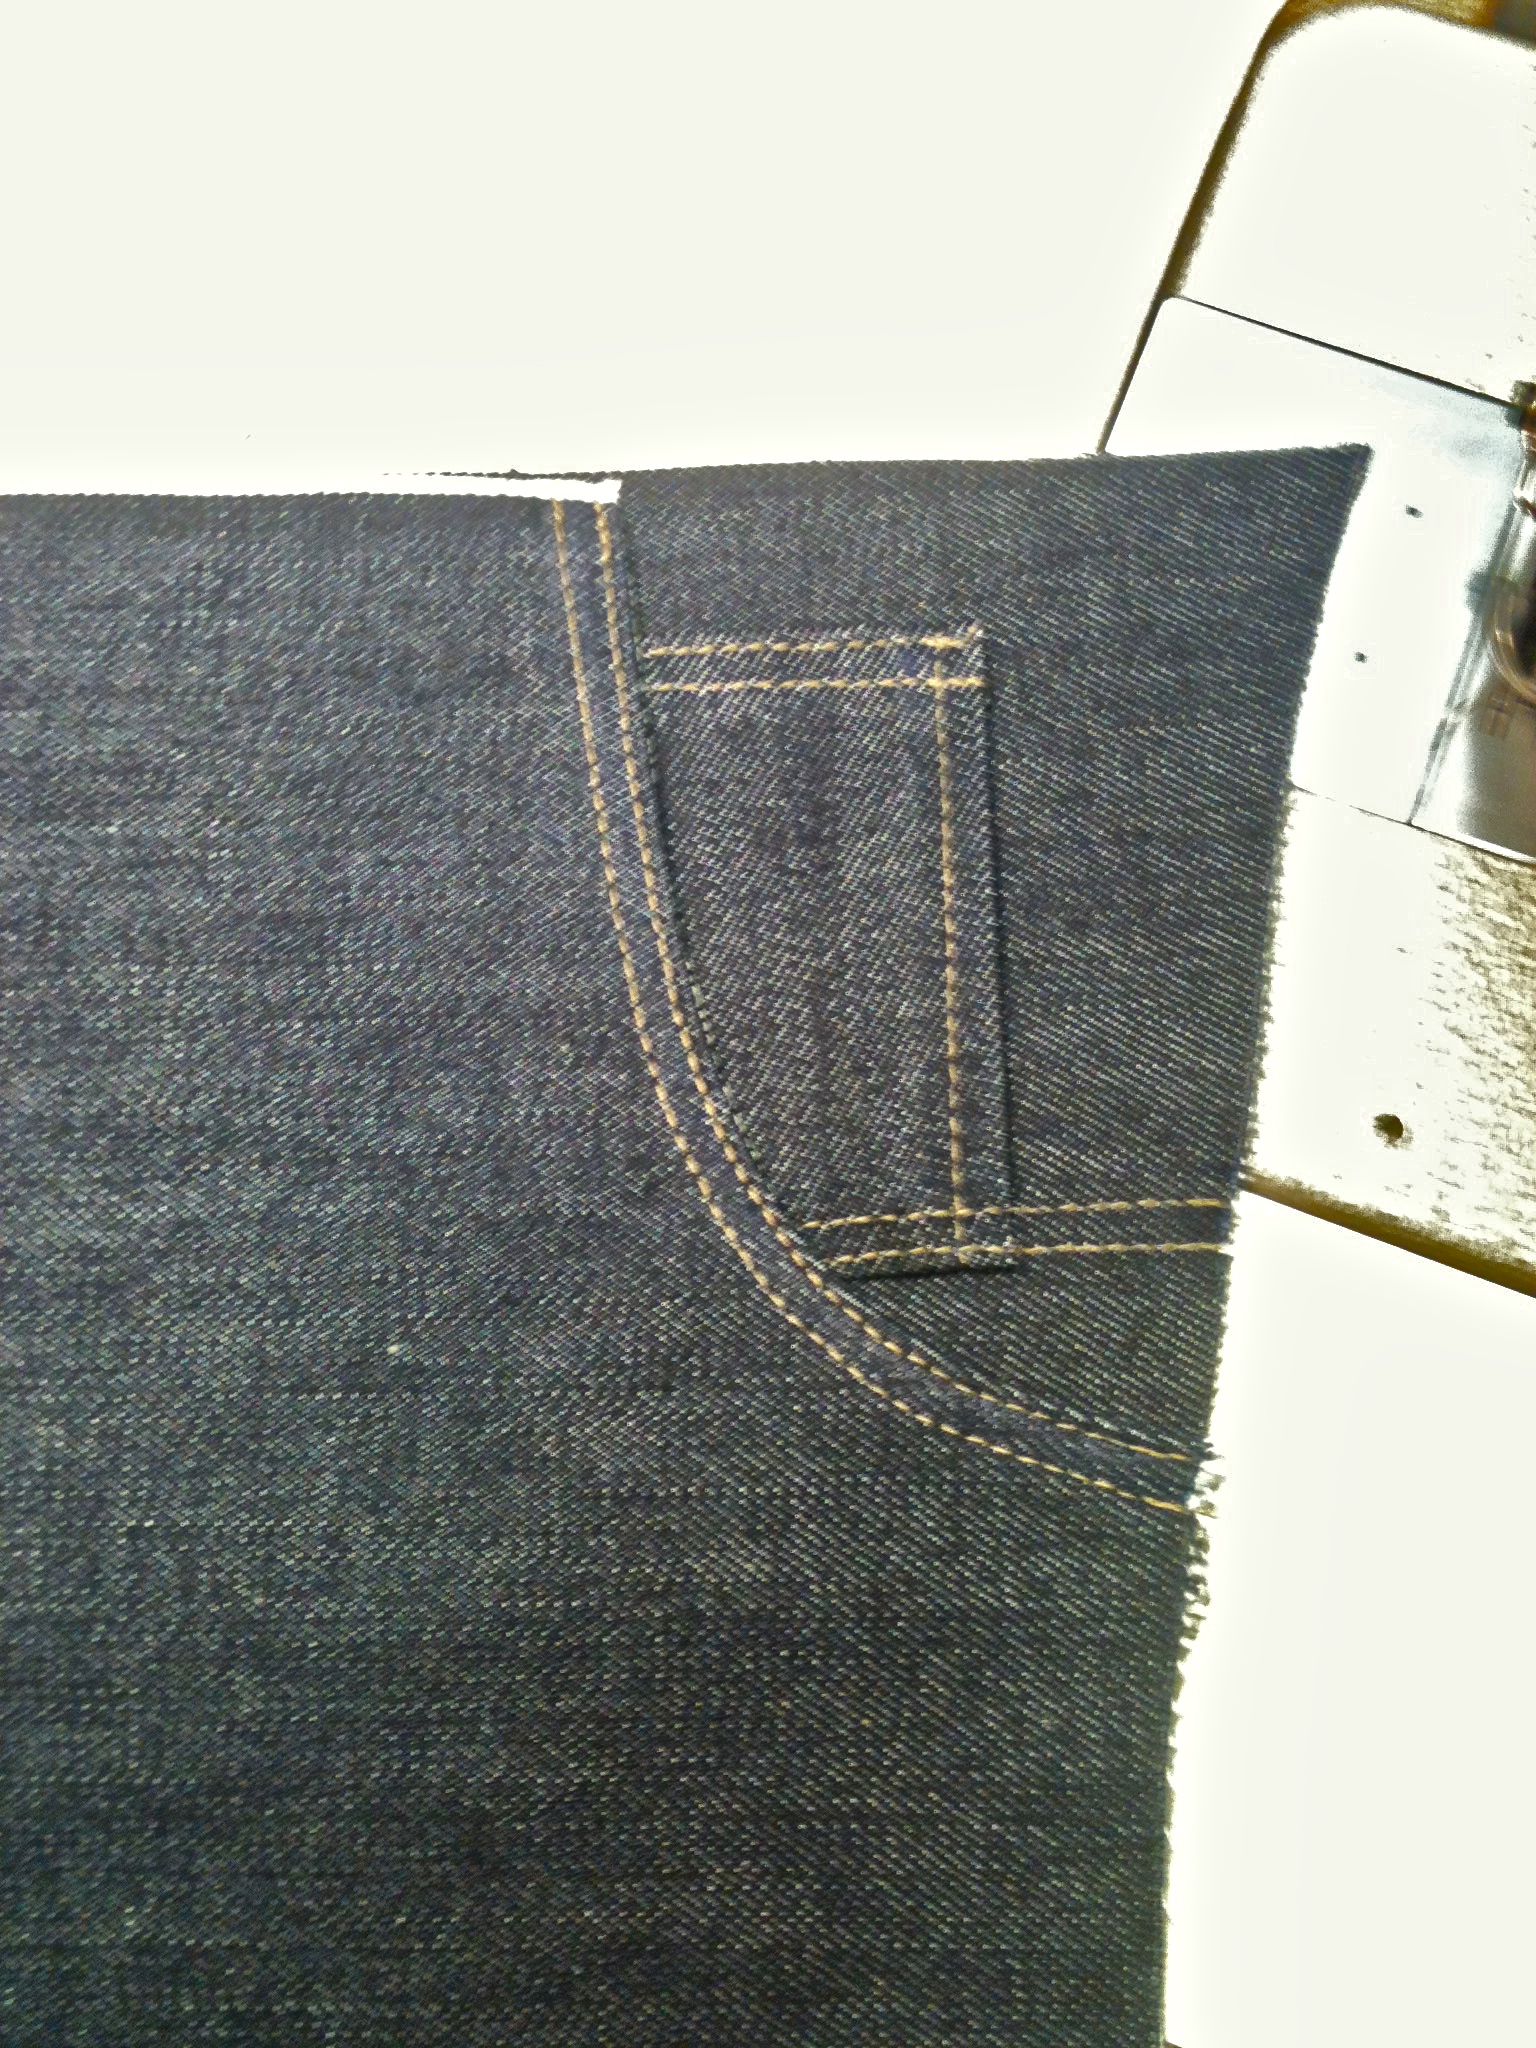 Making Your Own Jeans: The Sewing